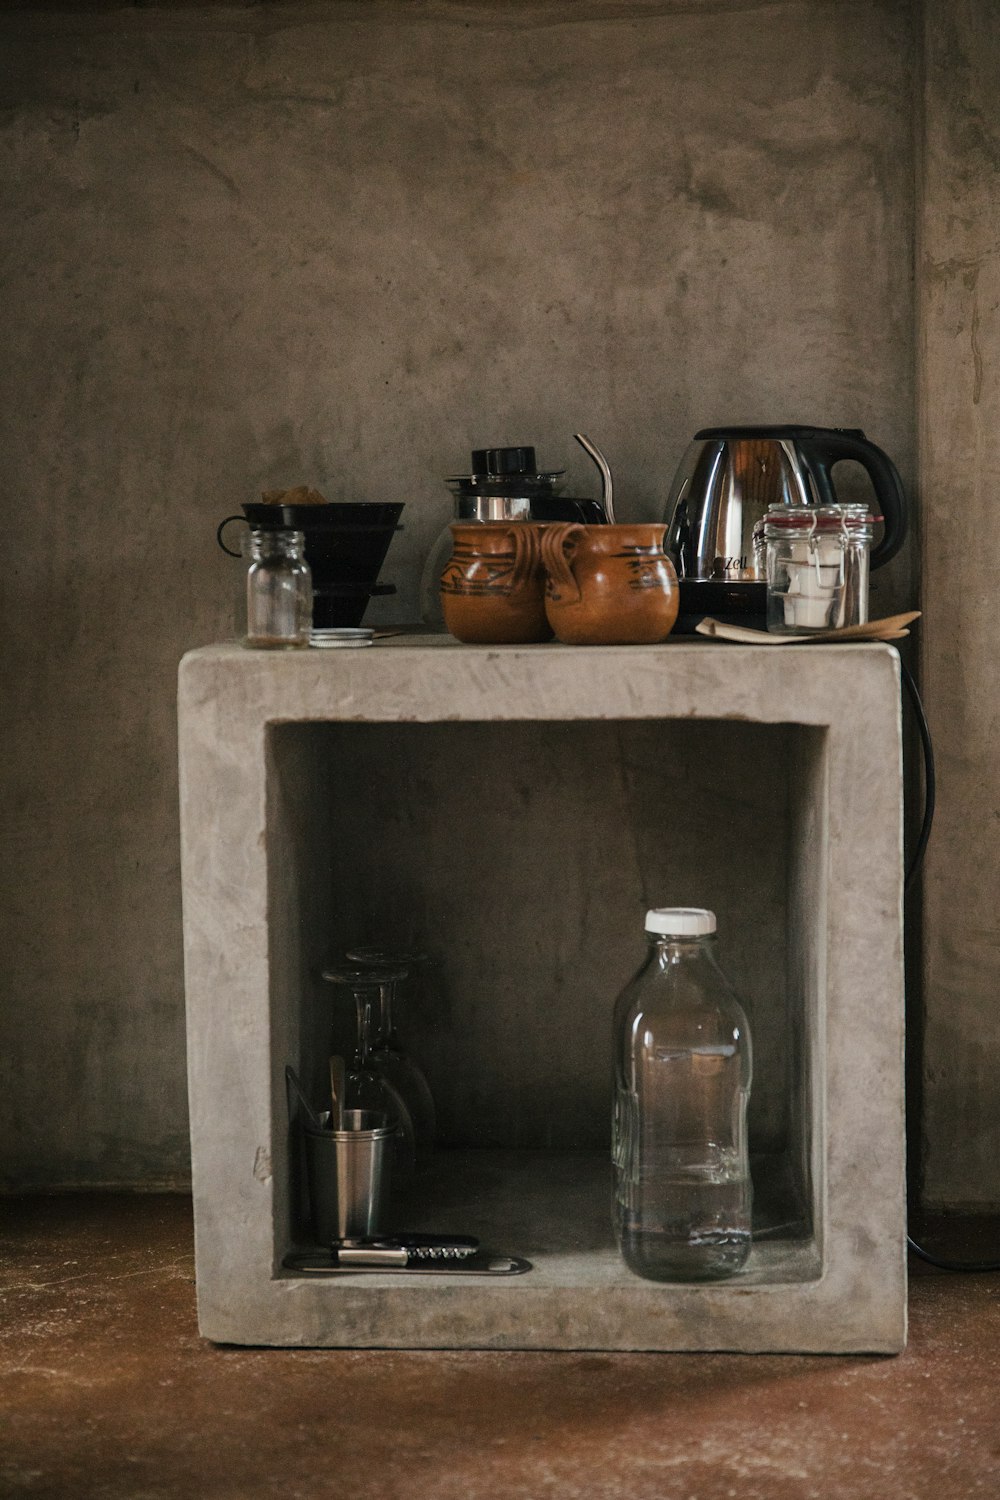 a concrete shelf with a coffee pot and a kettle on top of it